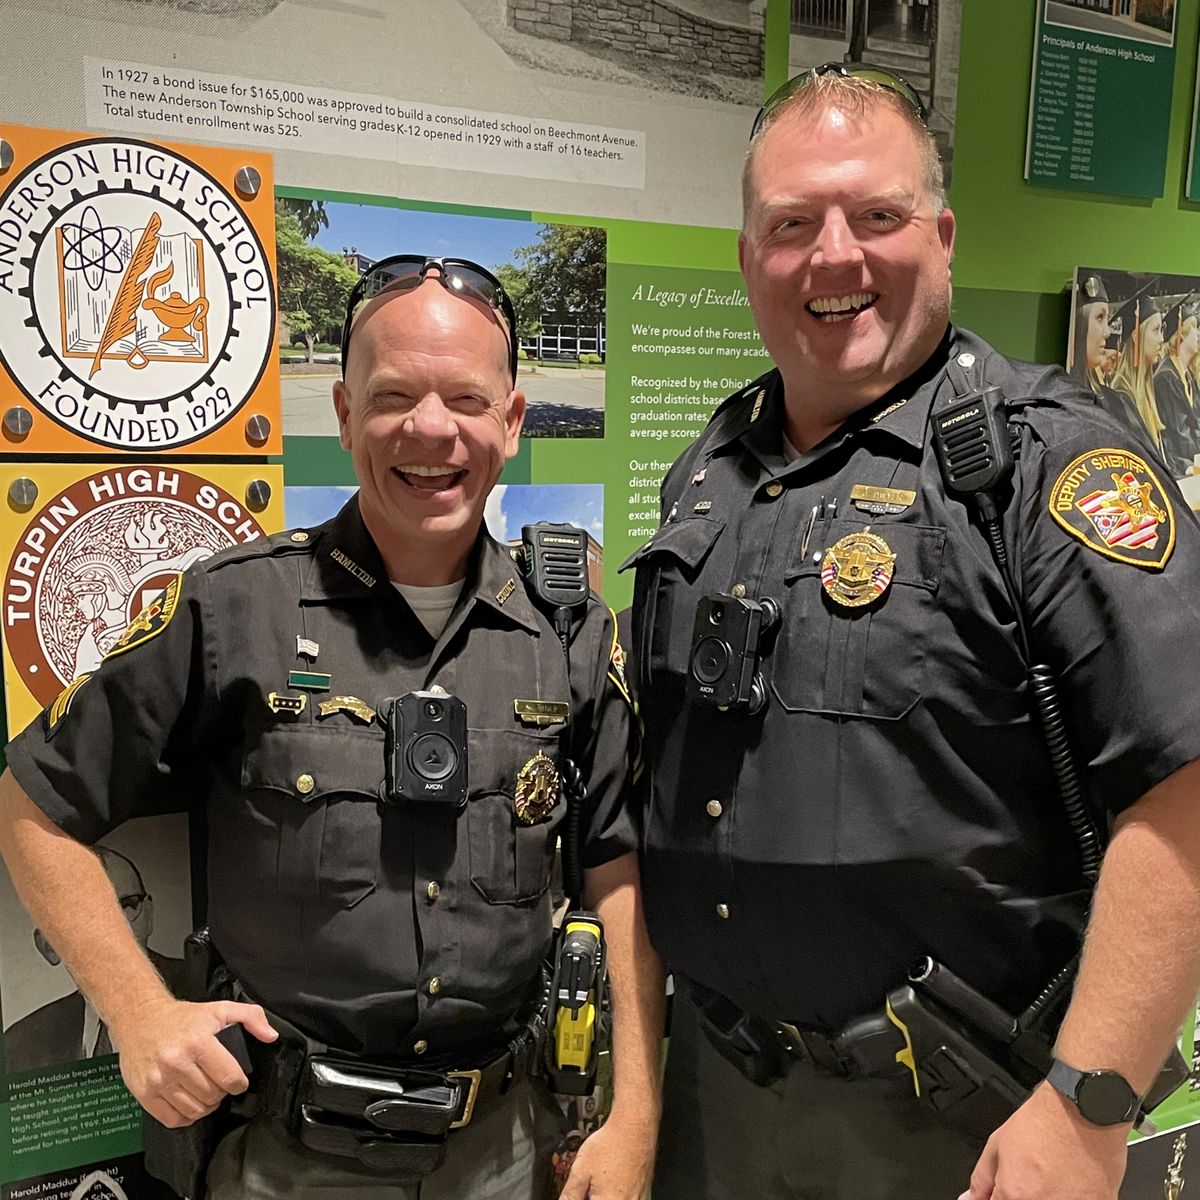 SROs Wolf and Dwyer pose for a photo in their uniforms